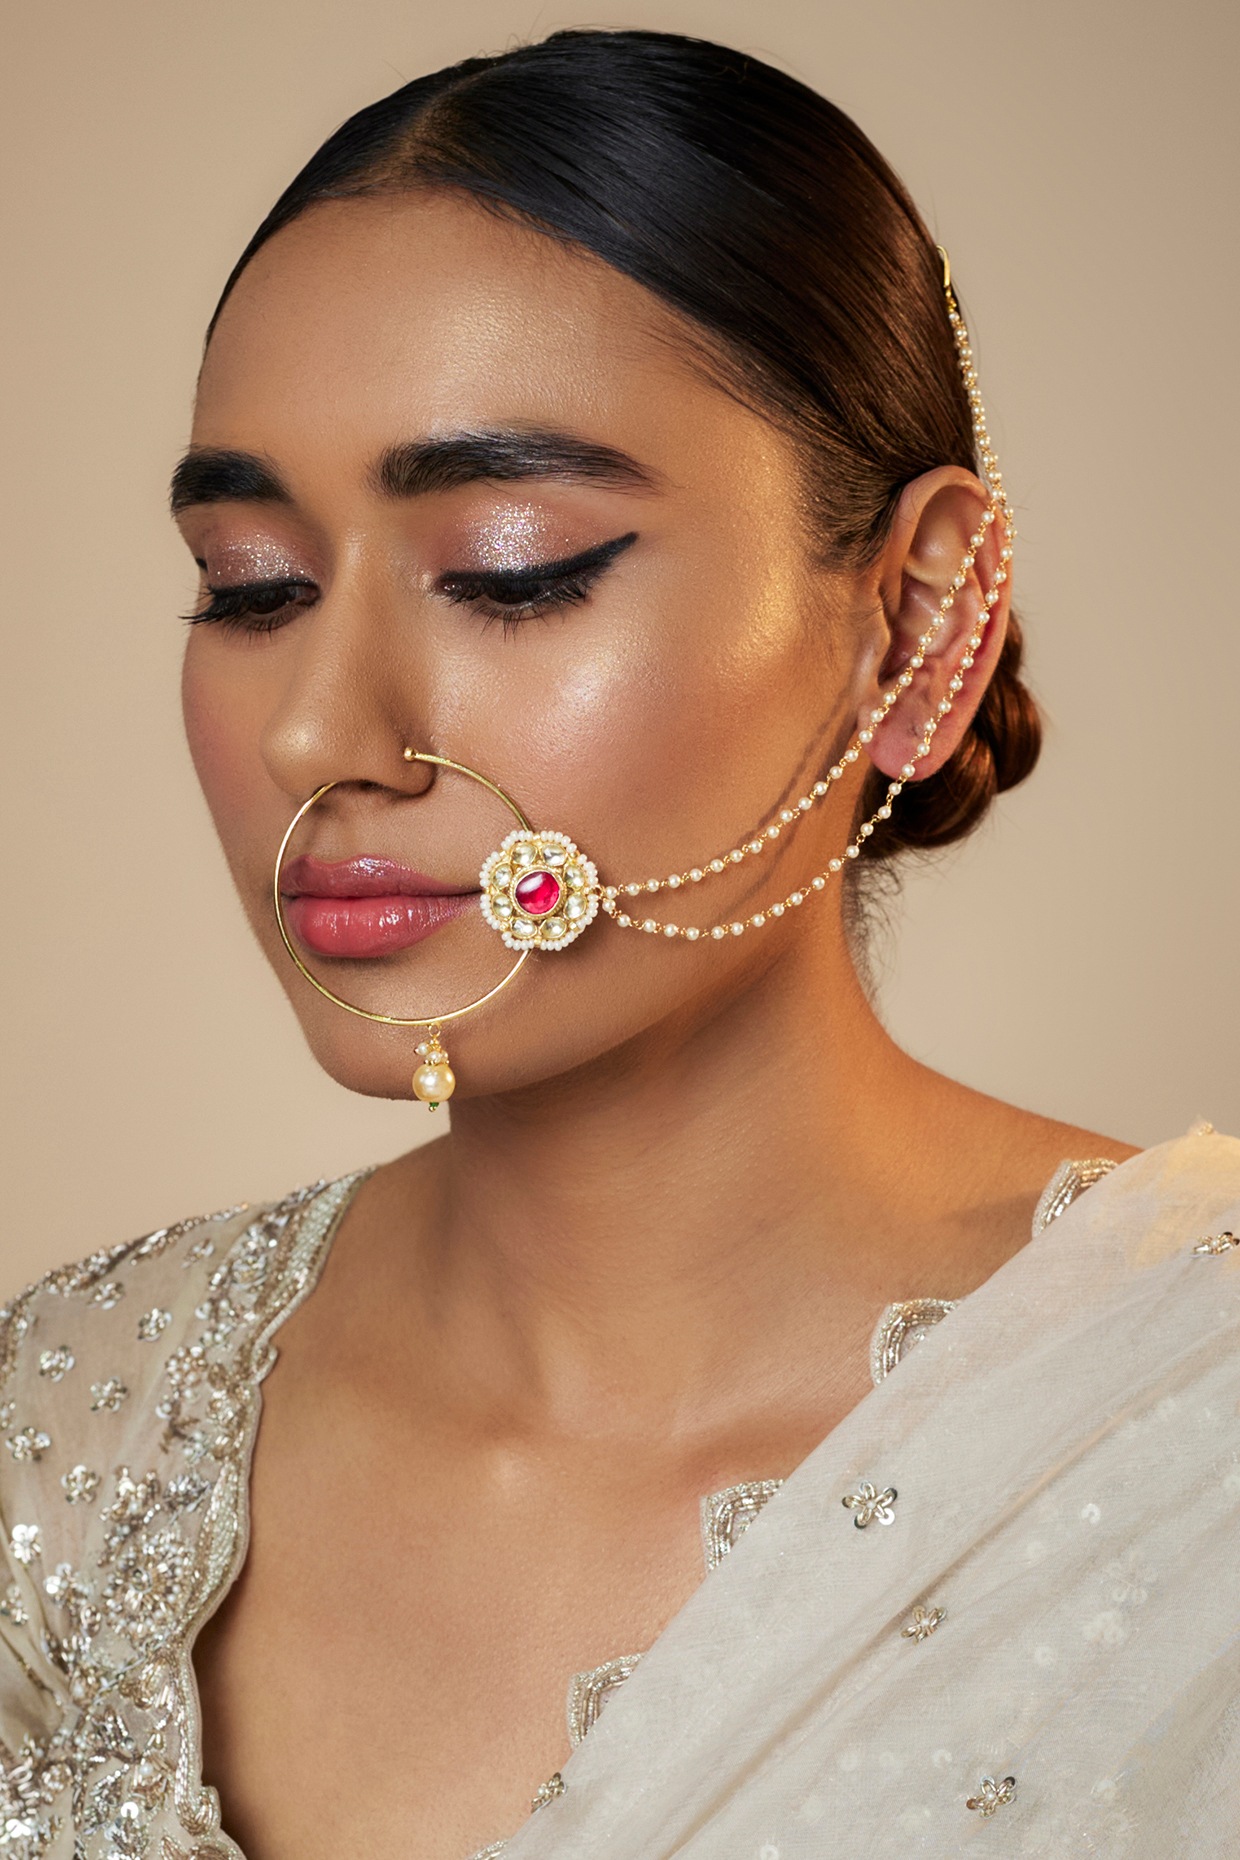 Glamorous bridal nose ring designs for your wedding get-up | Most Searched  Products - Times of India